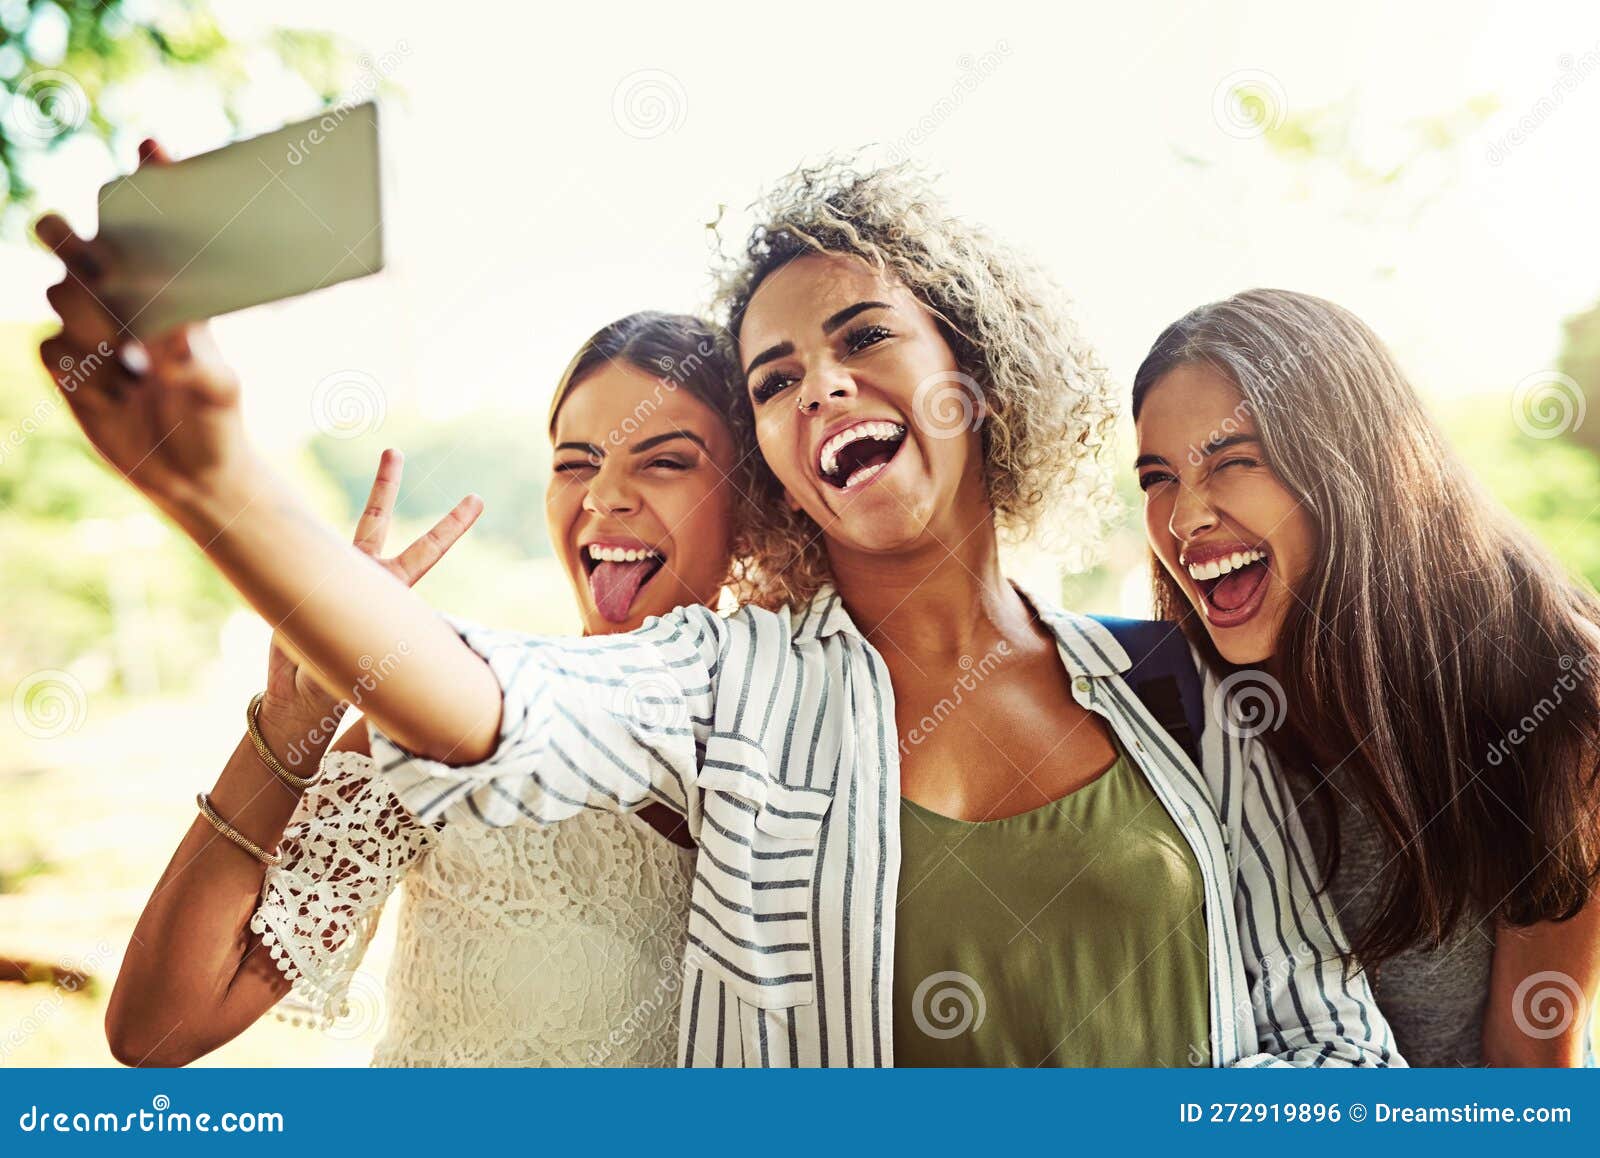 Premium Photo | A group of five lively women are taking a selfie on a sunny  day with a leafy tree in the background